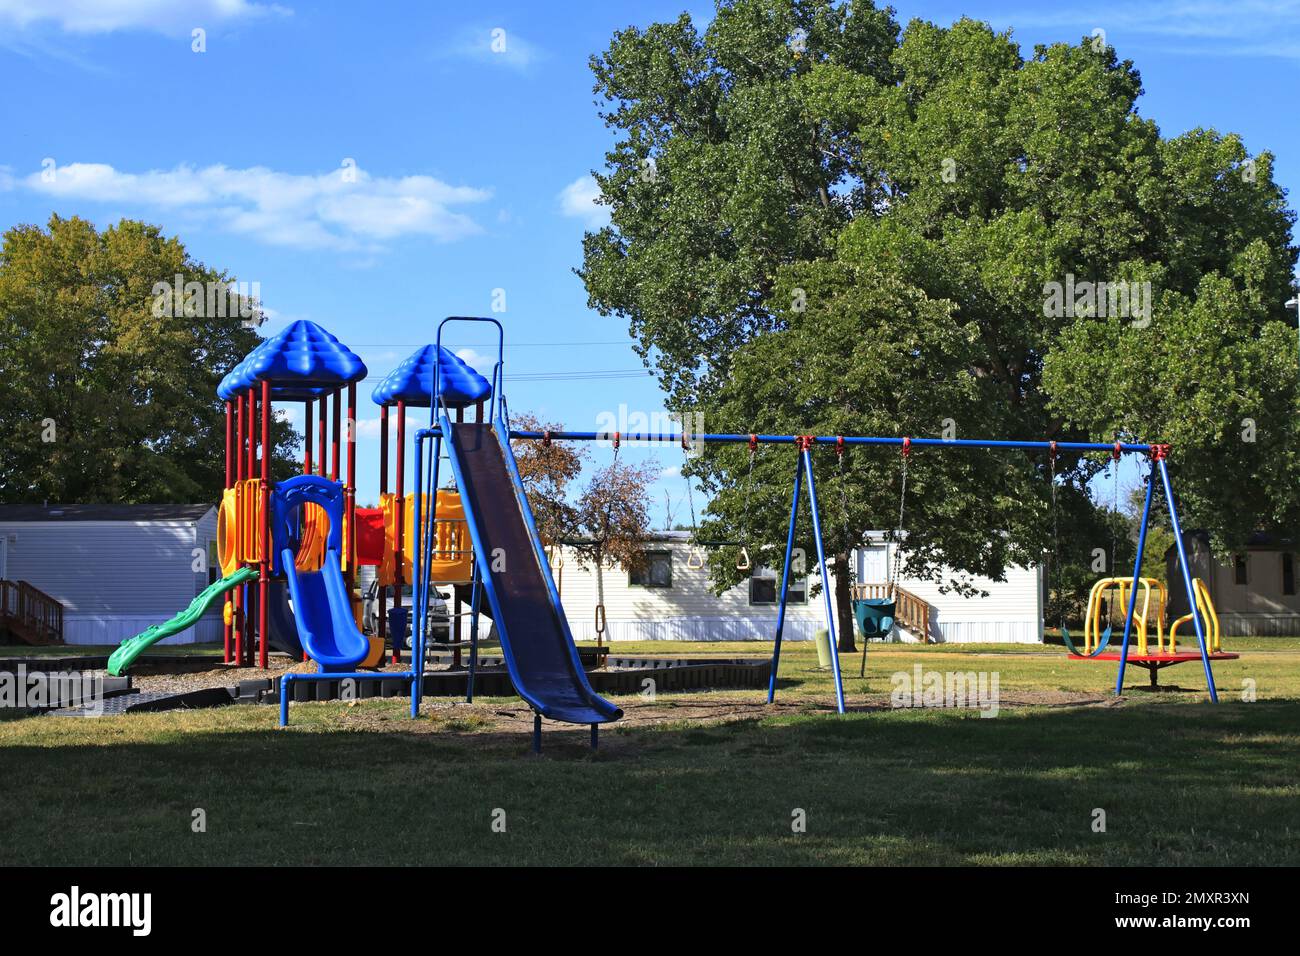 A Playground with blue sky and grass with tree's Stock Photo